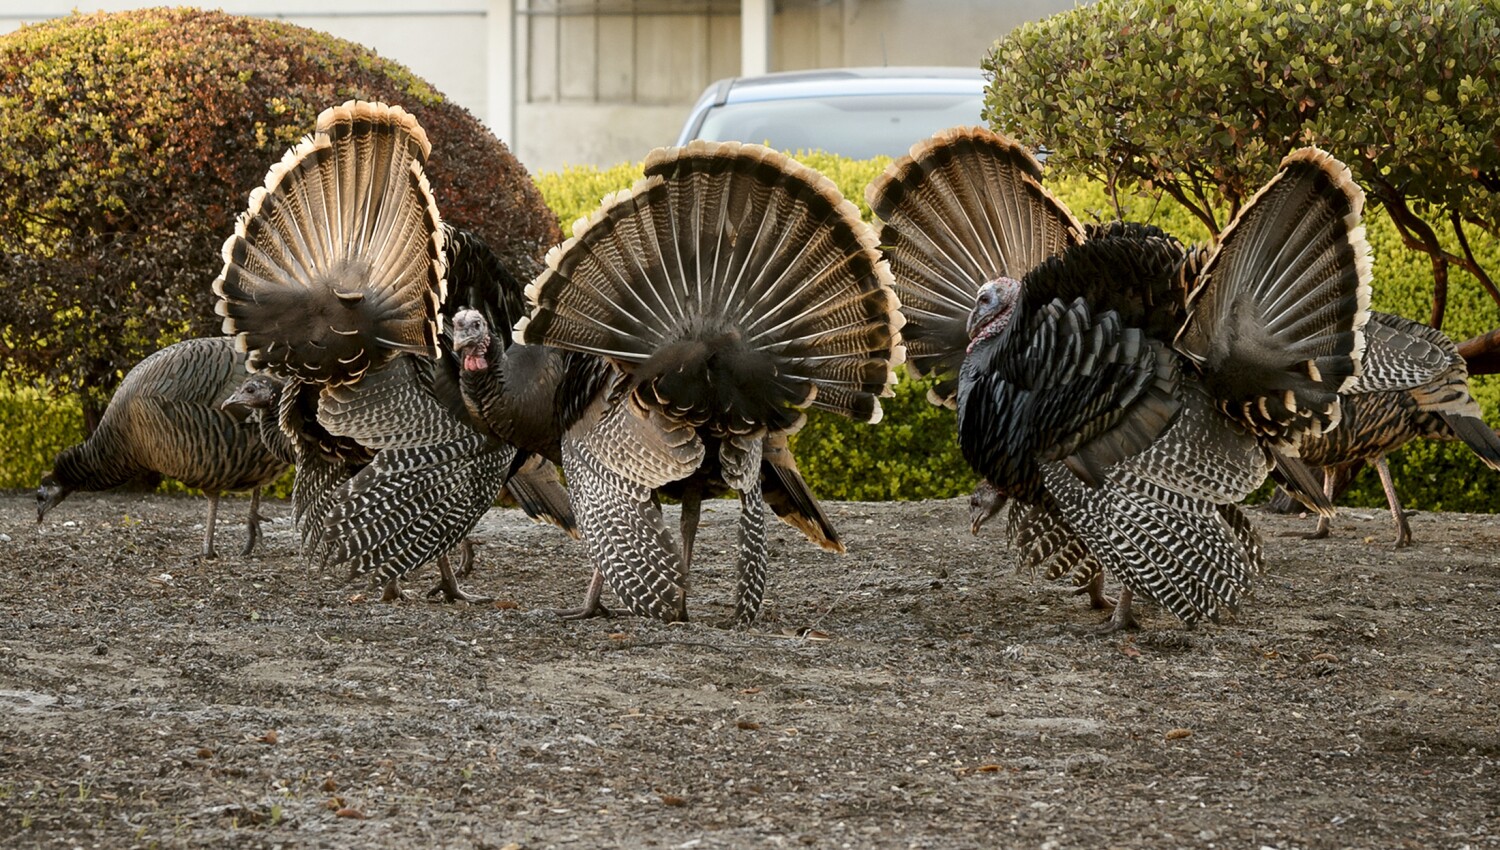 Turkeys are trashing a NASA research center in Silicon Valley, so they're getting the boot